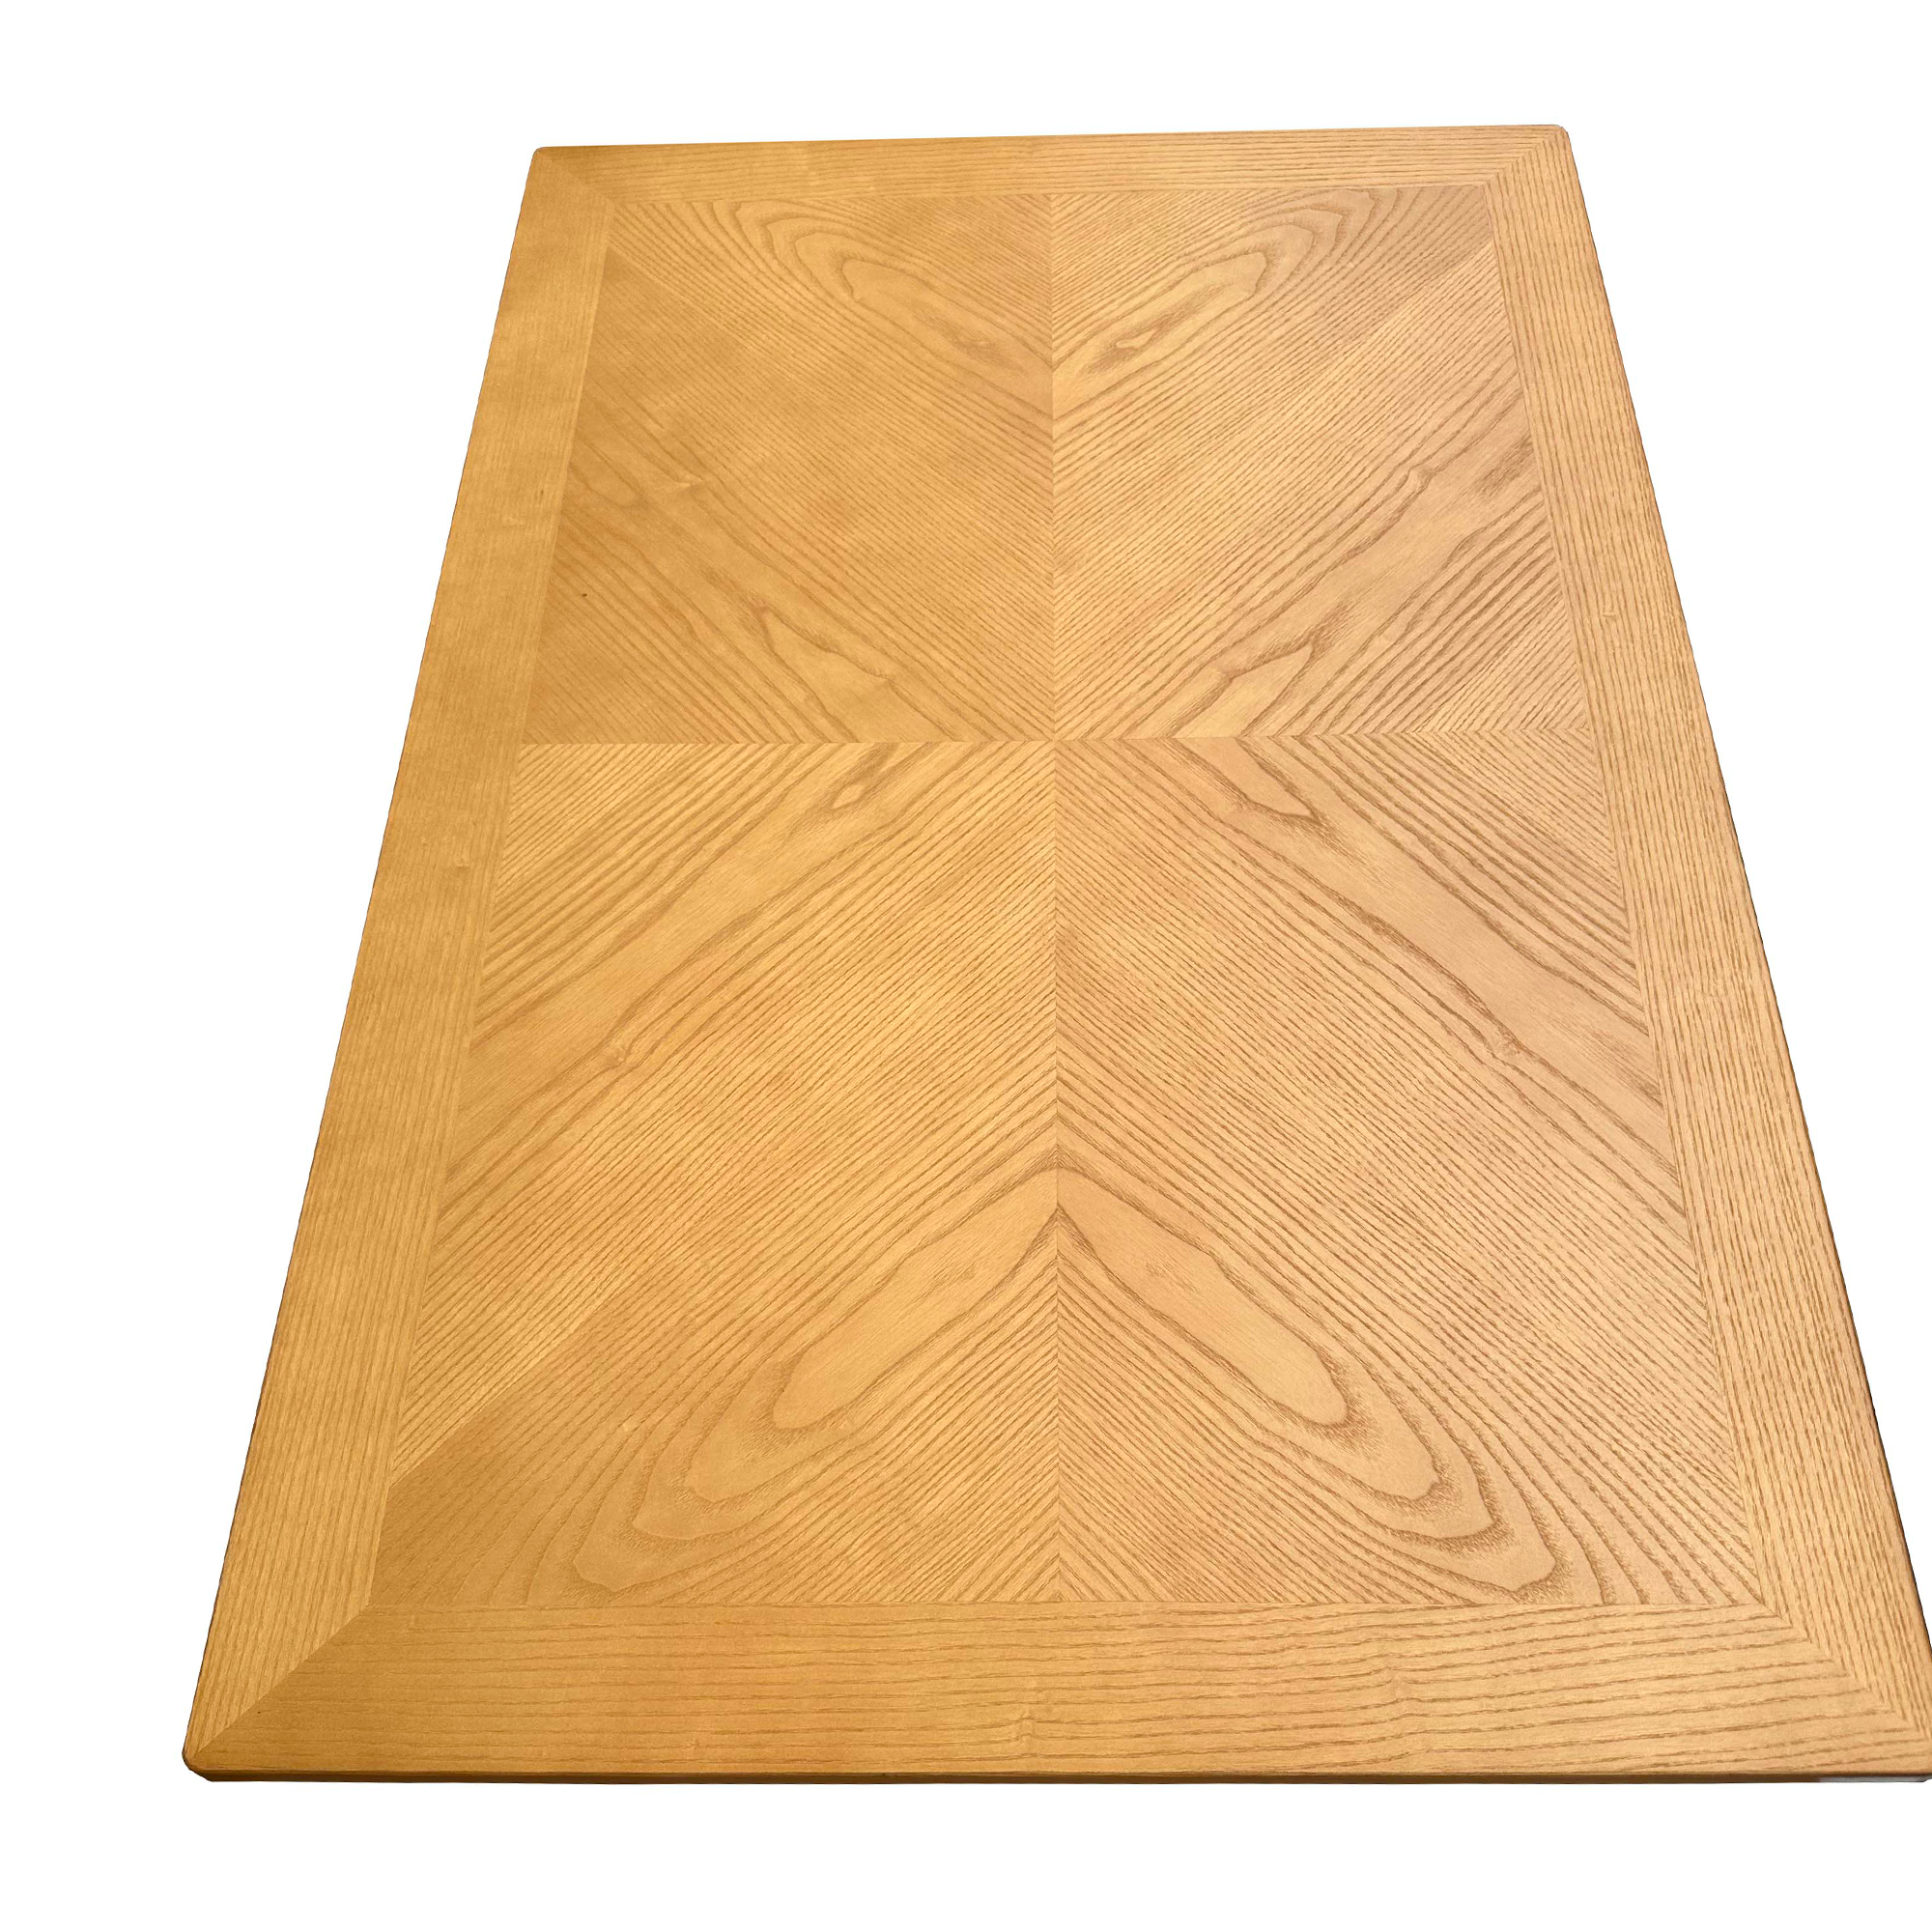 FV-11C ORA Rectangle Wood Table tops| Dining Table tops 120cm*80cm